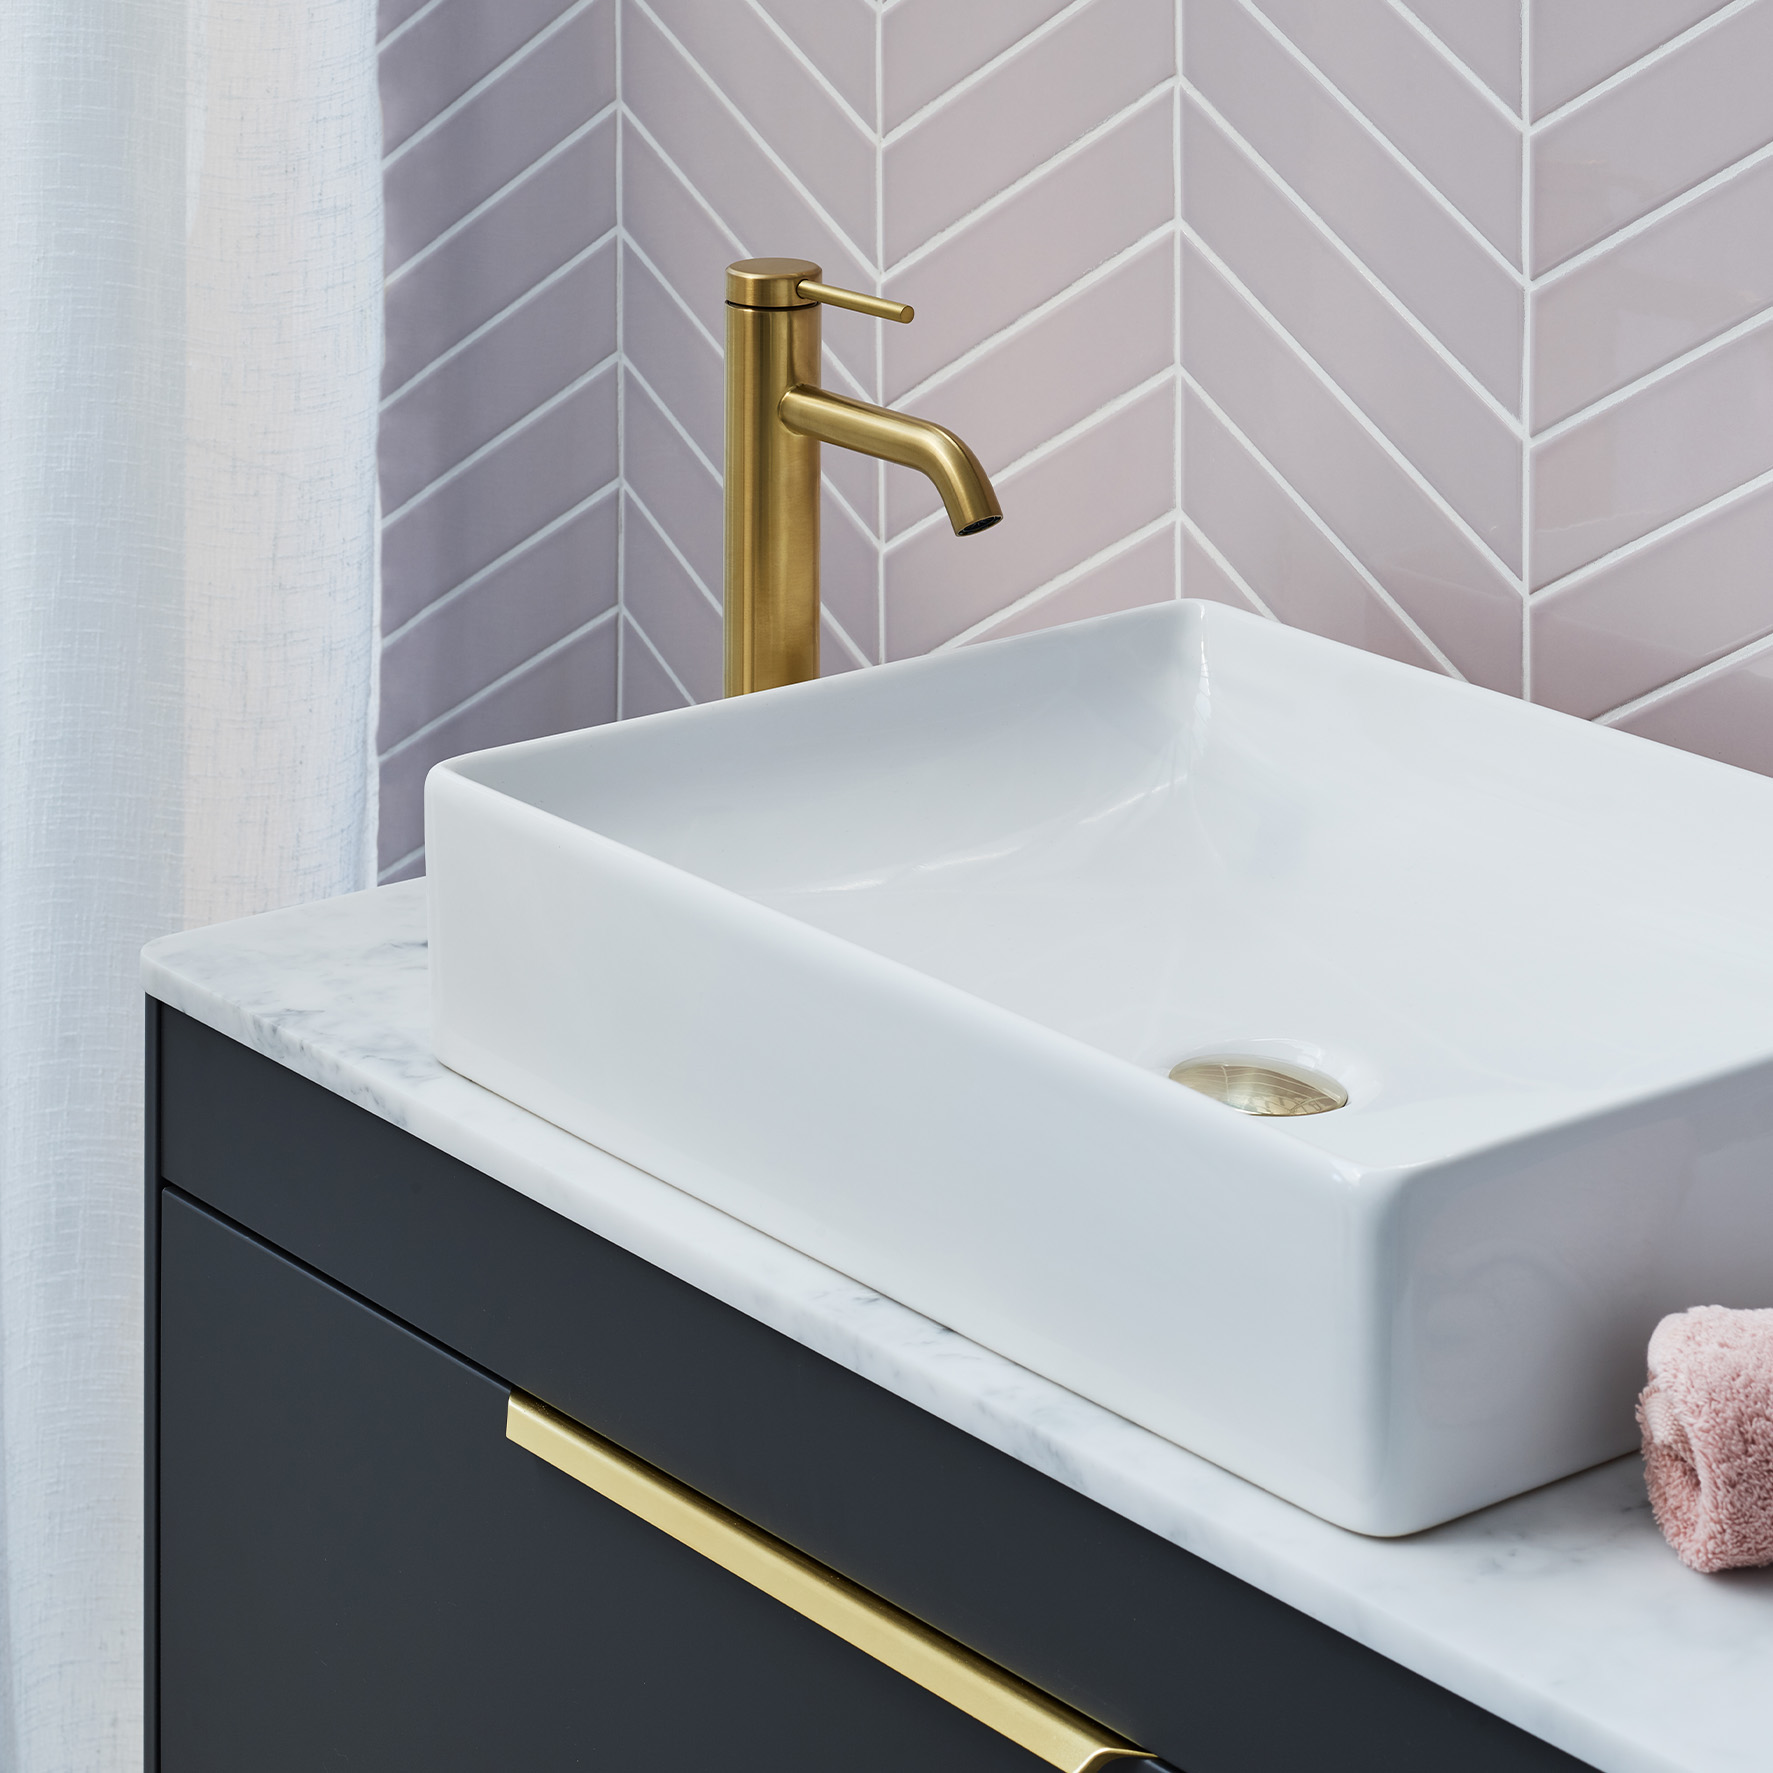 Achieve sophistication and luxury with a modern countertop basin